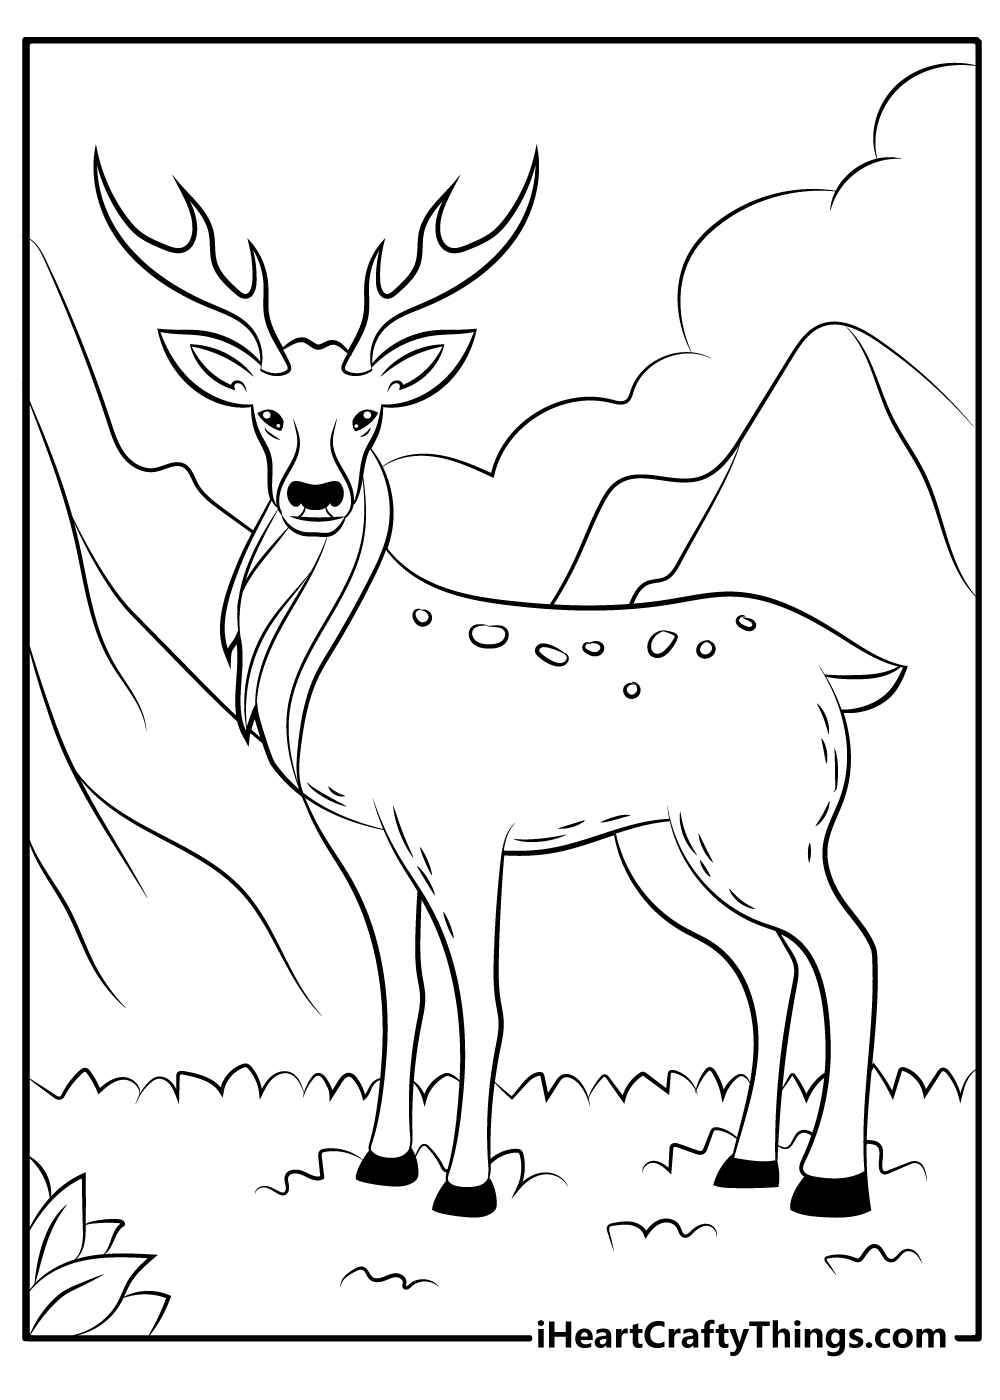 buck Deer Coloring Pages free download